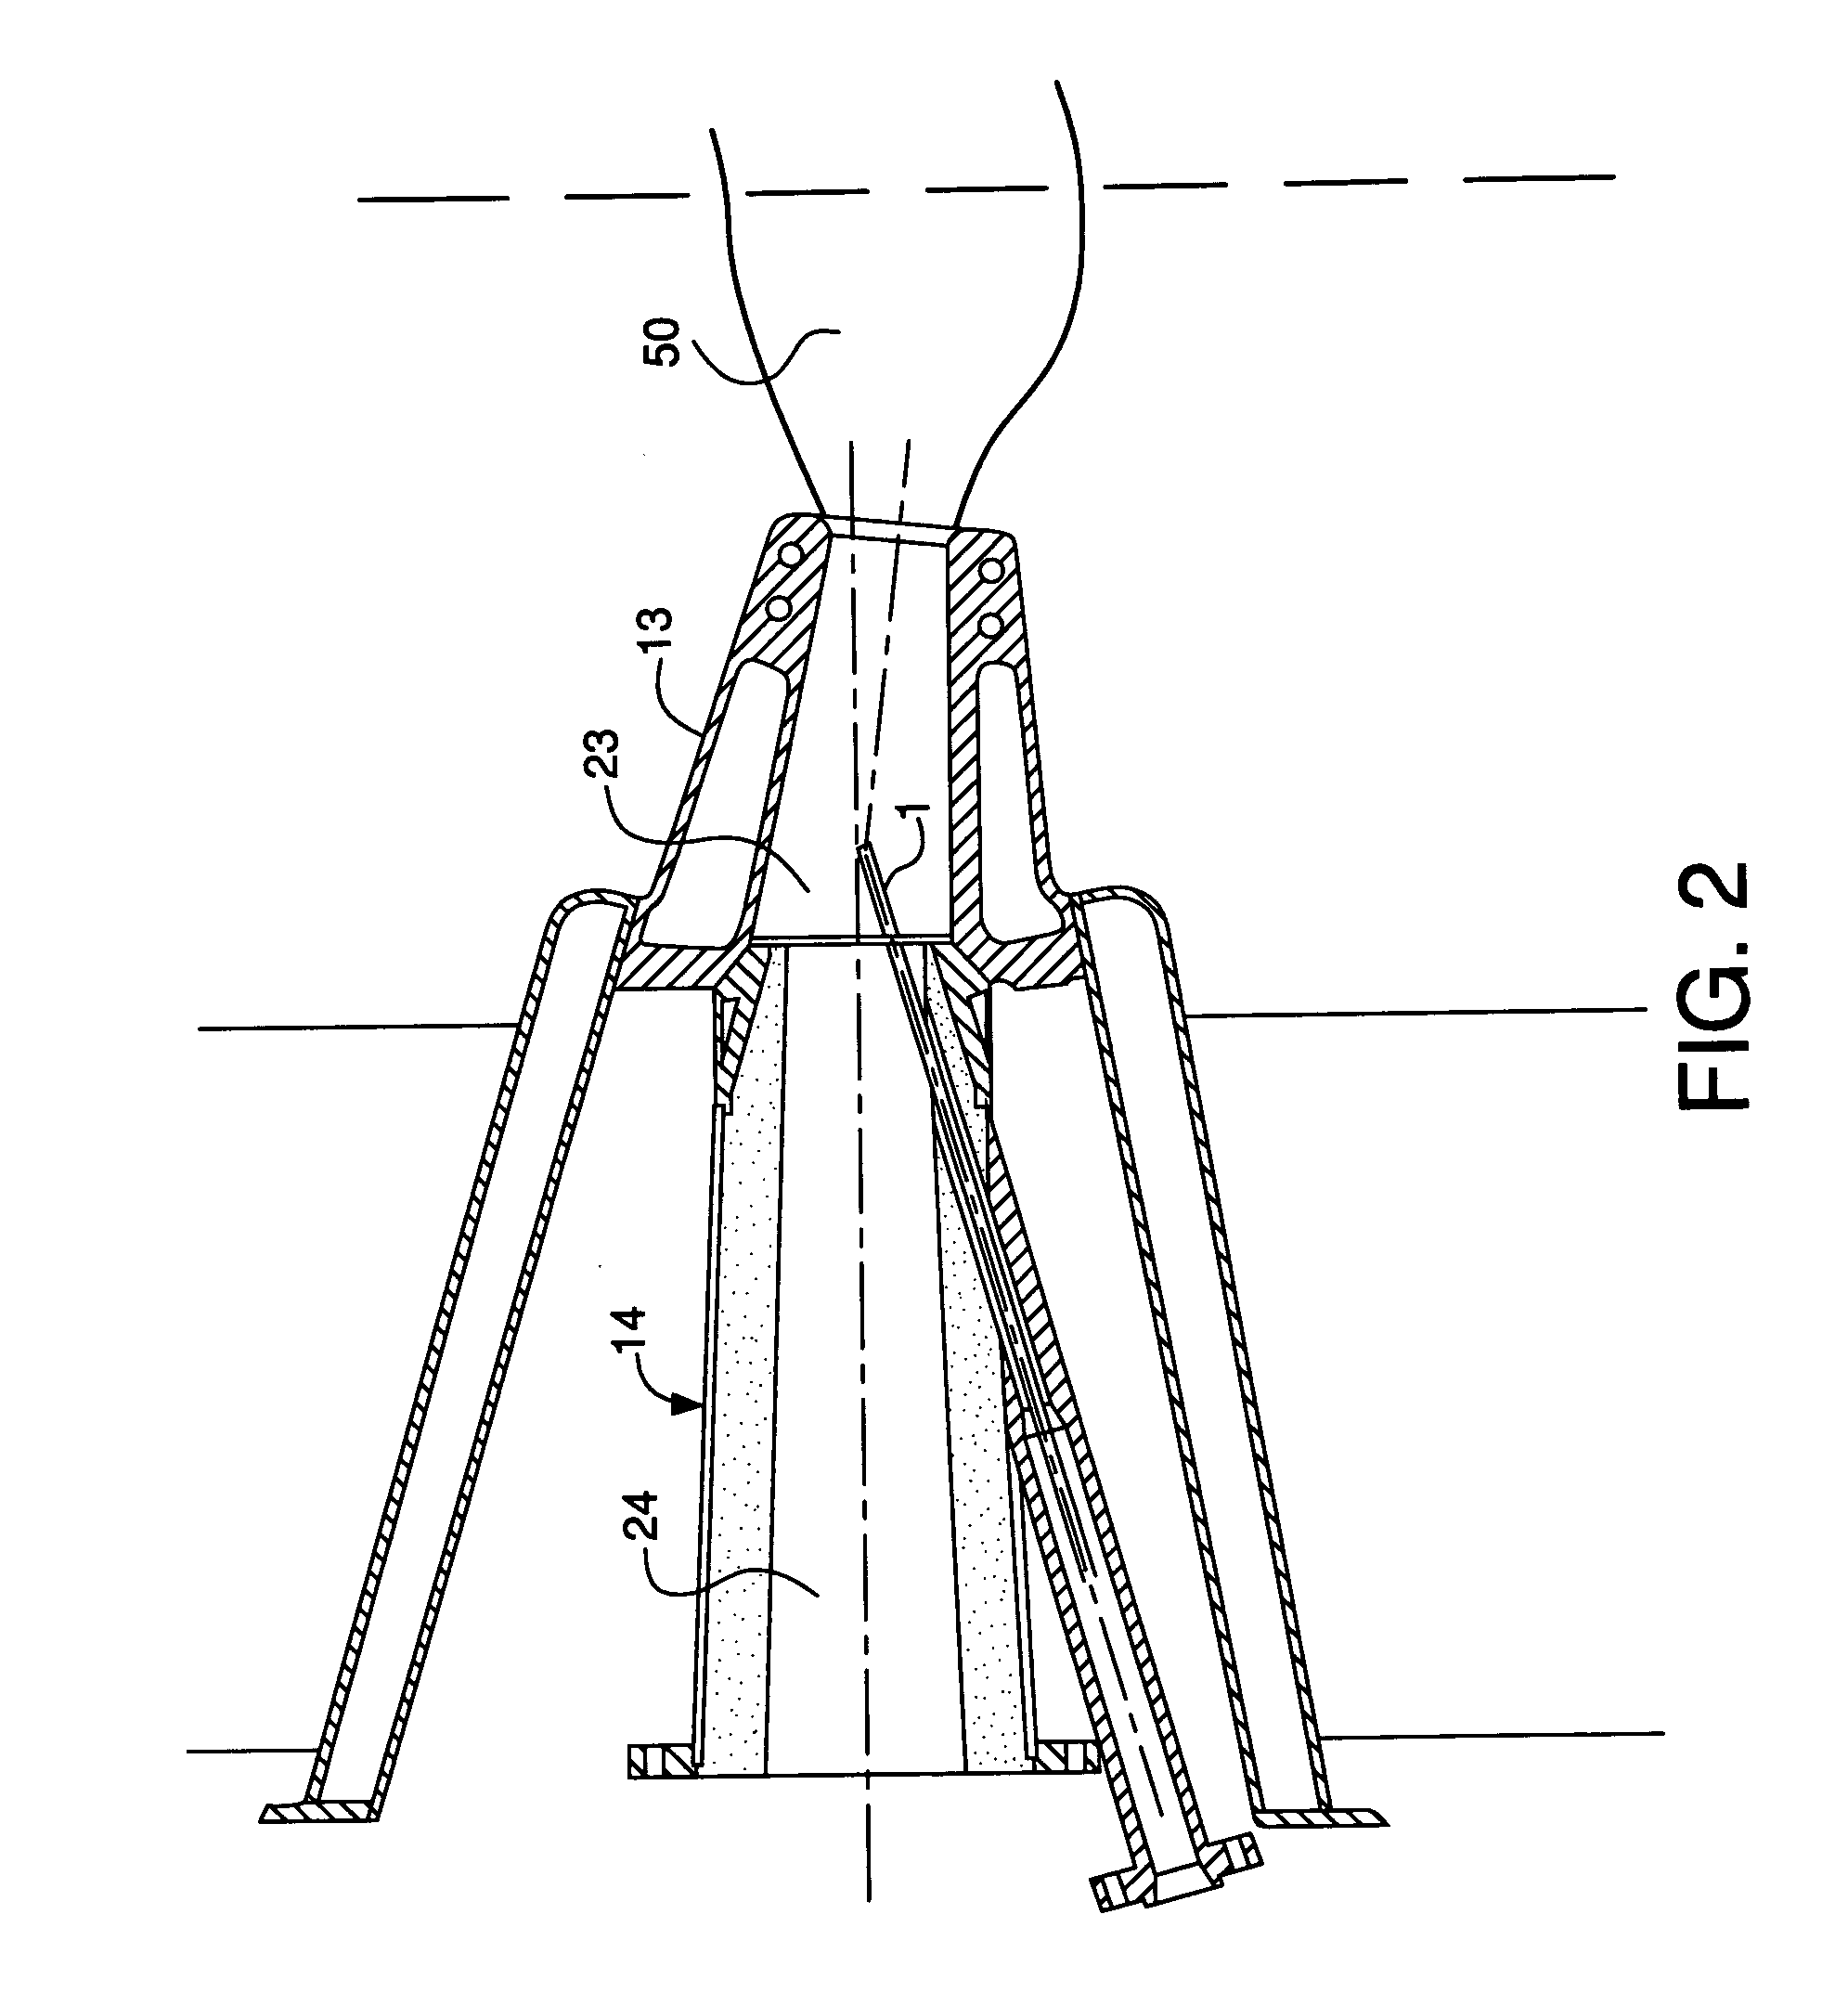 Oxidant-swirled fossil fuel injector for a shaft furnace